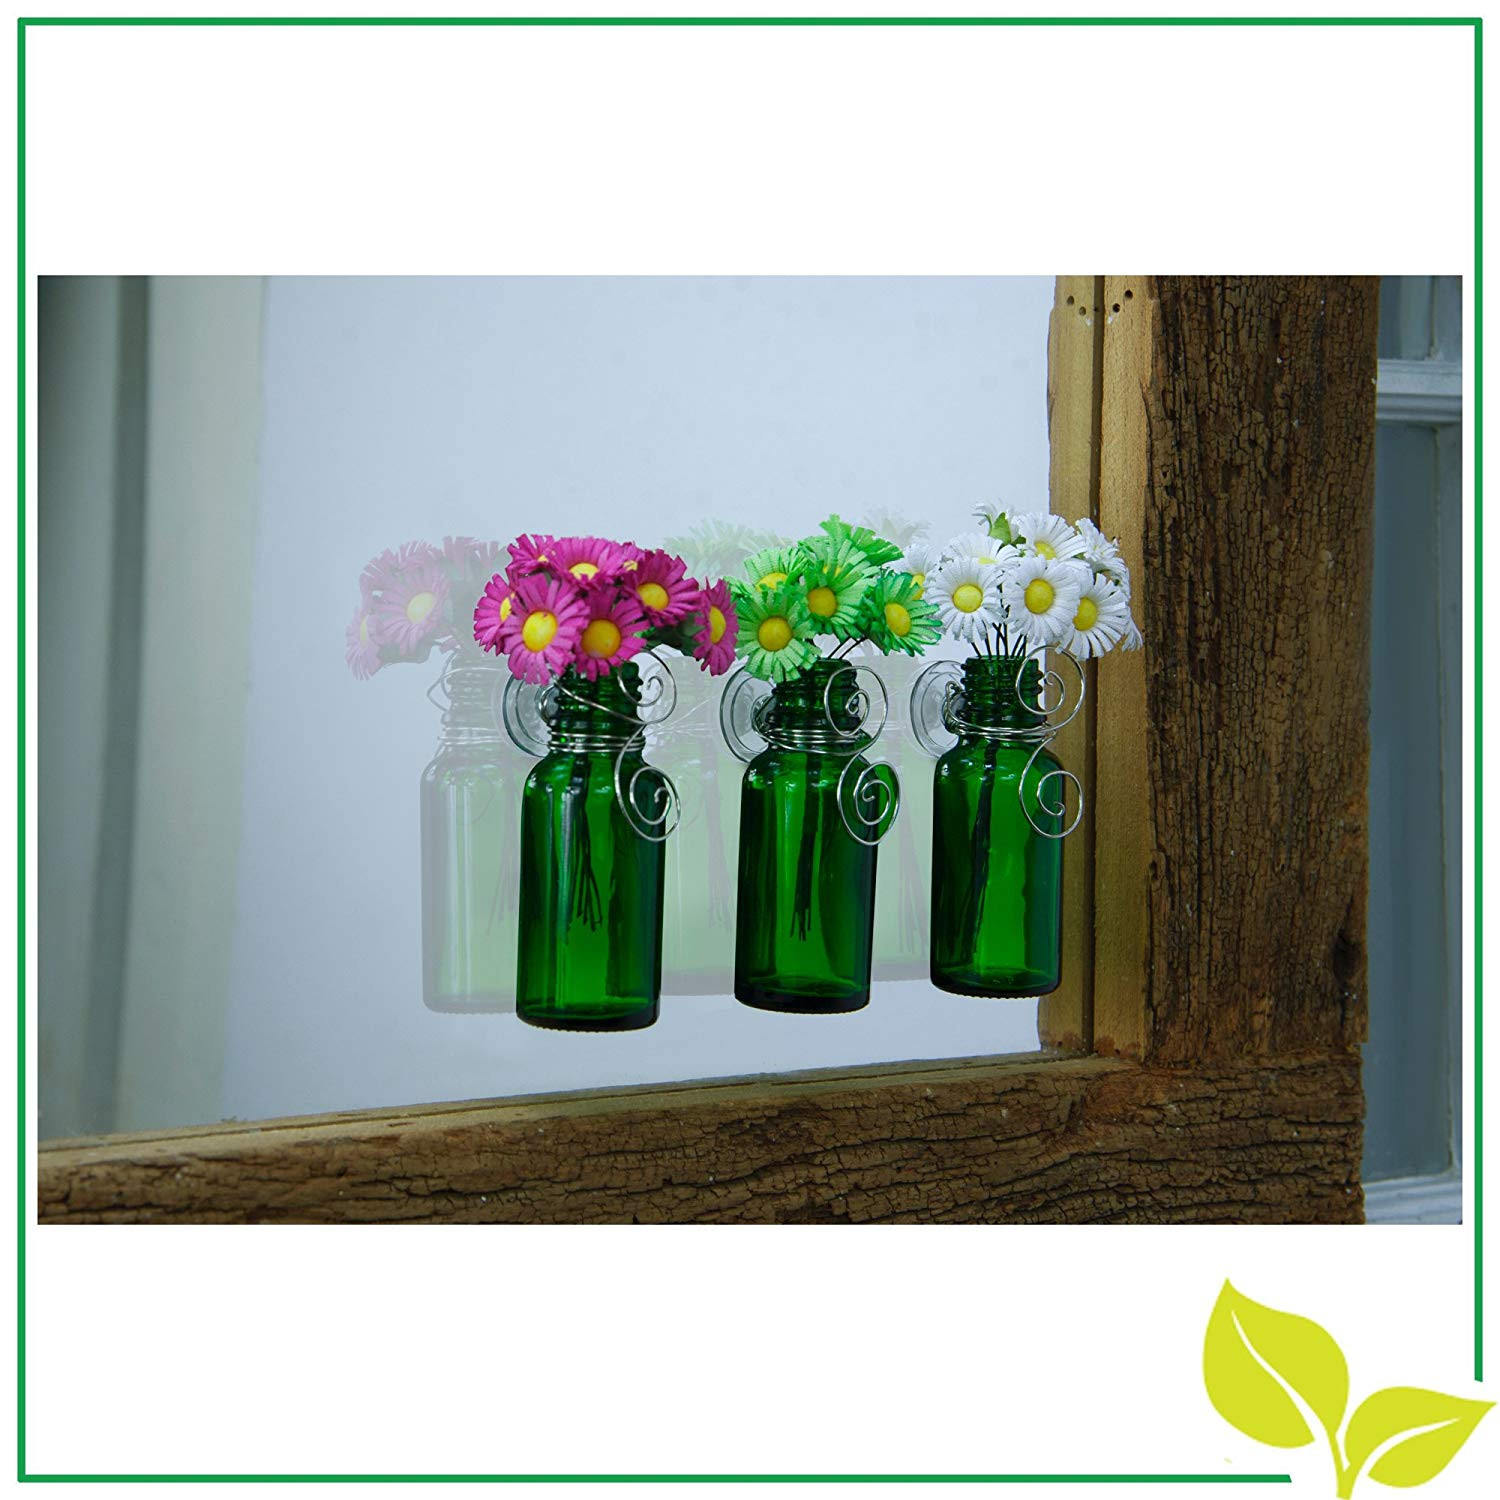 24 Nice Test Tube Flower Vase Rack 2024 free download test tube flower vase rack of amazon com vazzini mini vase bouquet suction cup bud bottle with amazon com vazzini mini vase bouquet suction cup bud bottle holder with flowers decorative for 